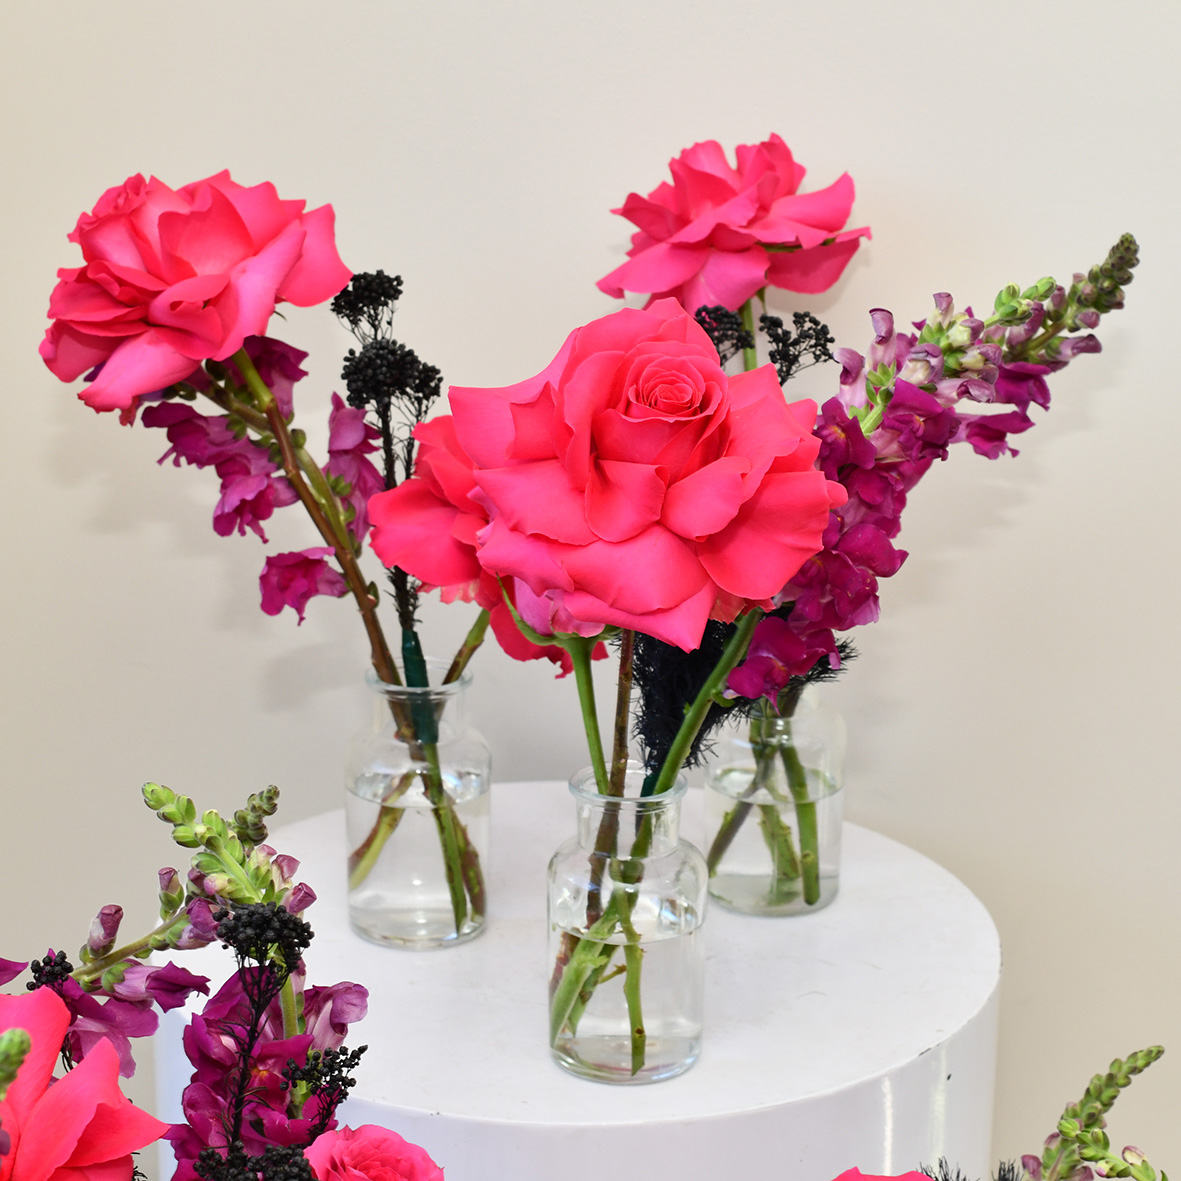 Floral Arrangements for Events - Posy Jars - POSY102